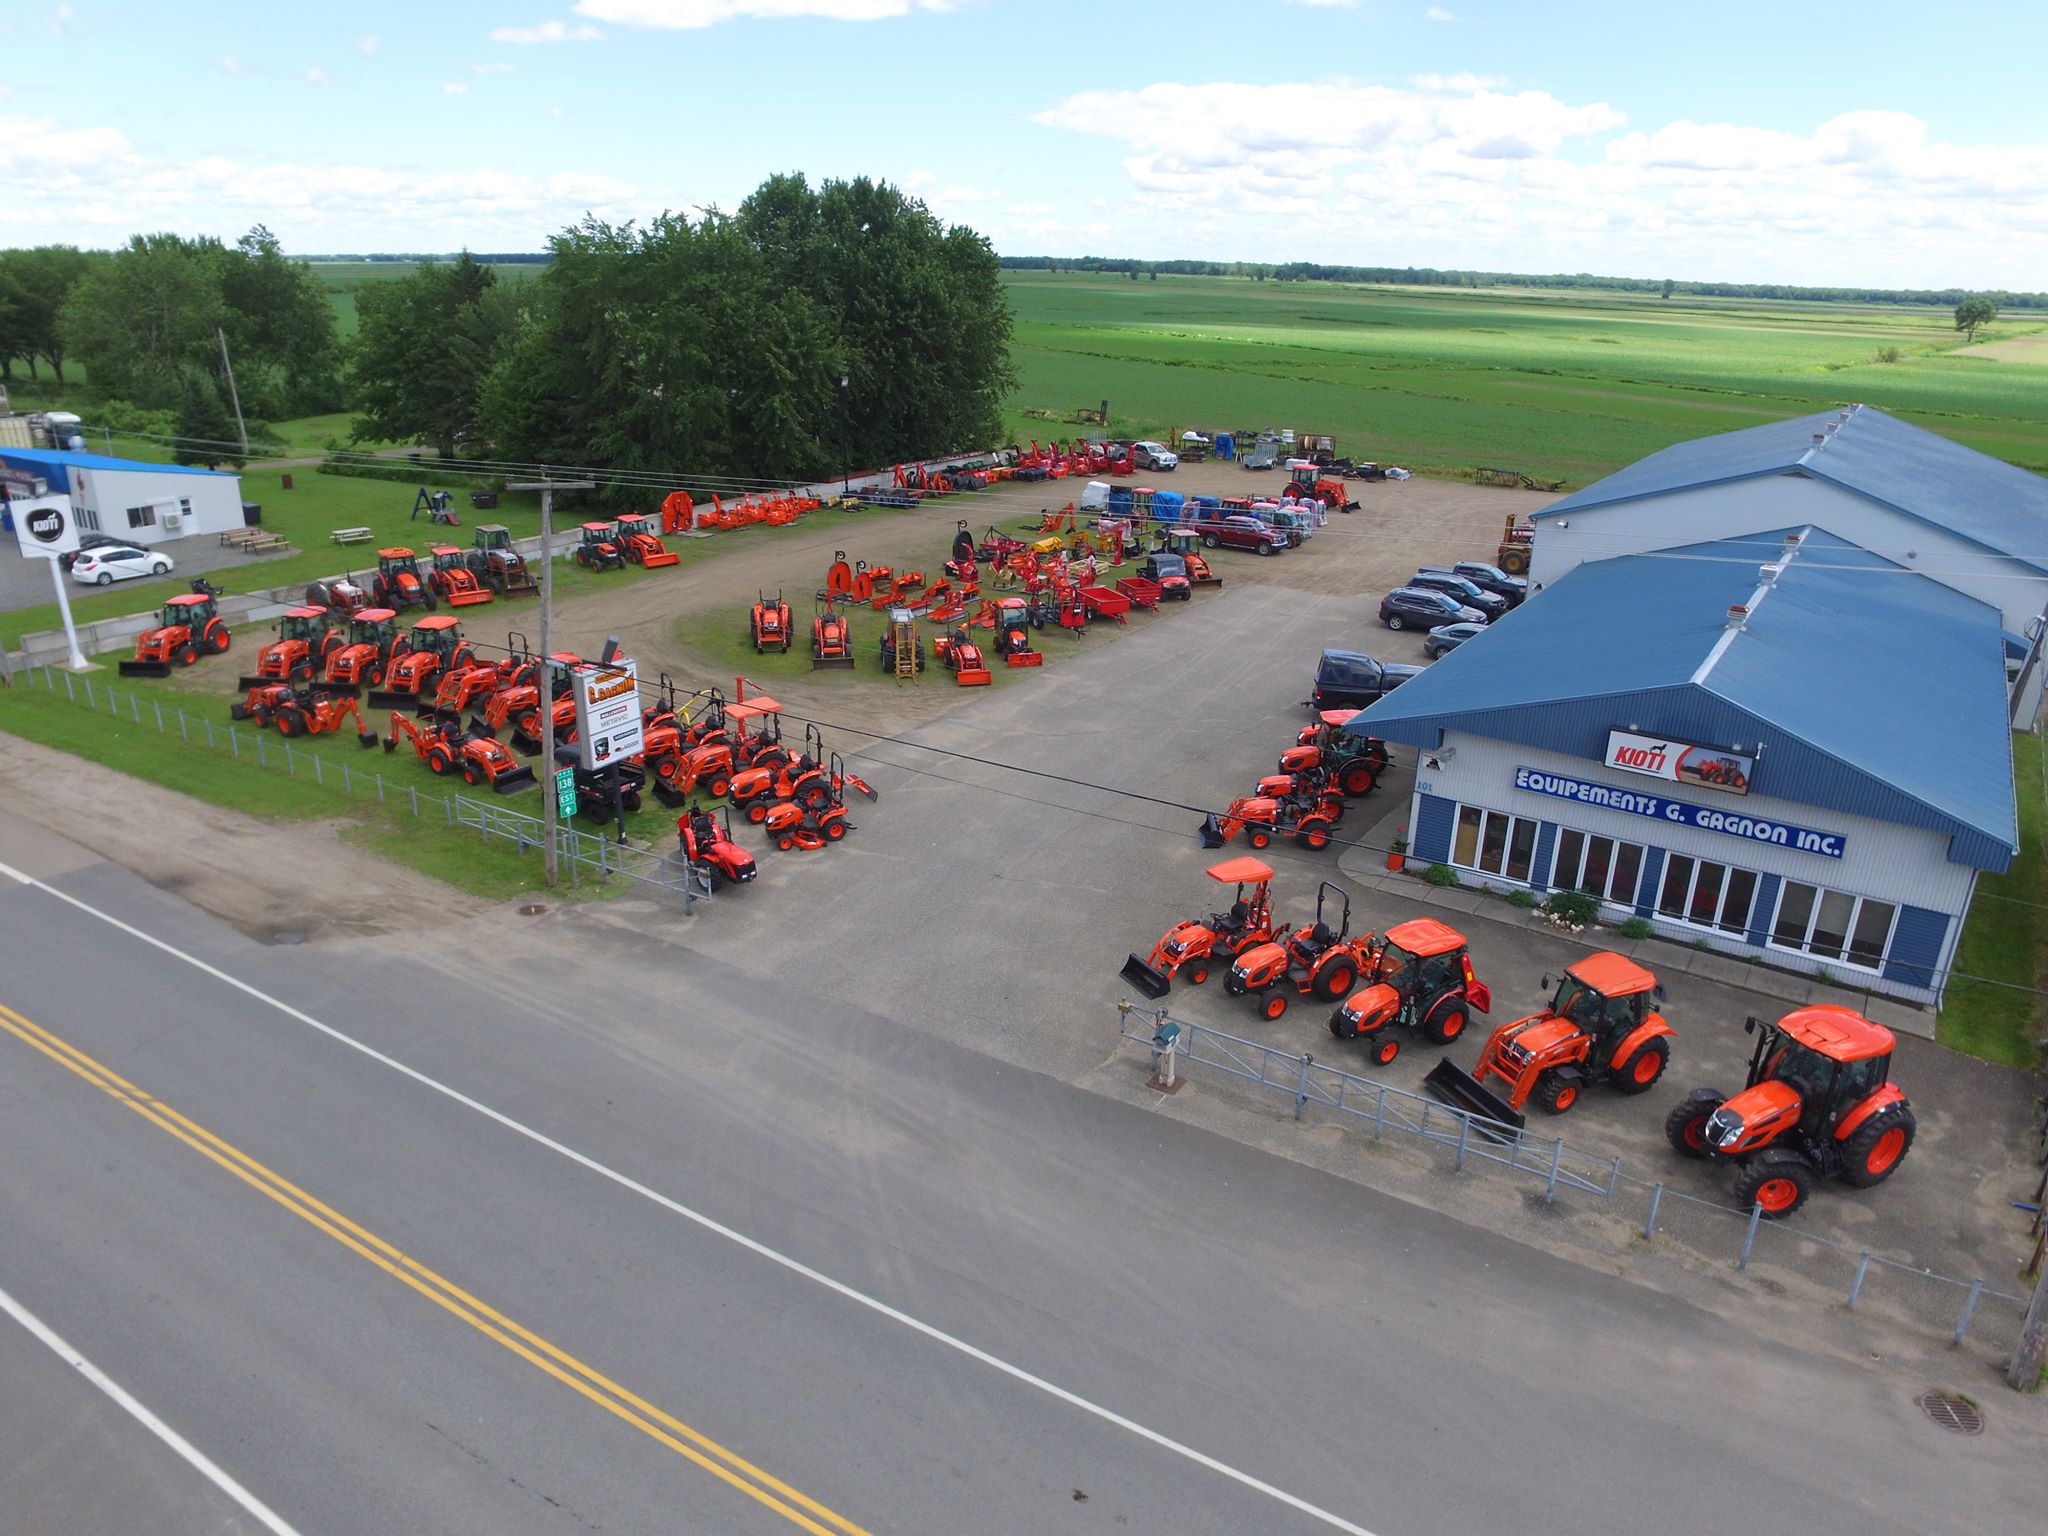 Équipements G.Gagnon | Agricultural machinery | Specialized tractors | Compact tractors | Kioti | Simplicity